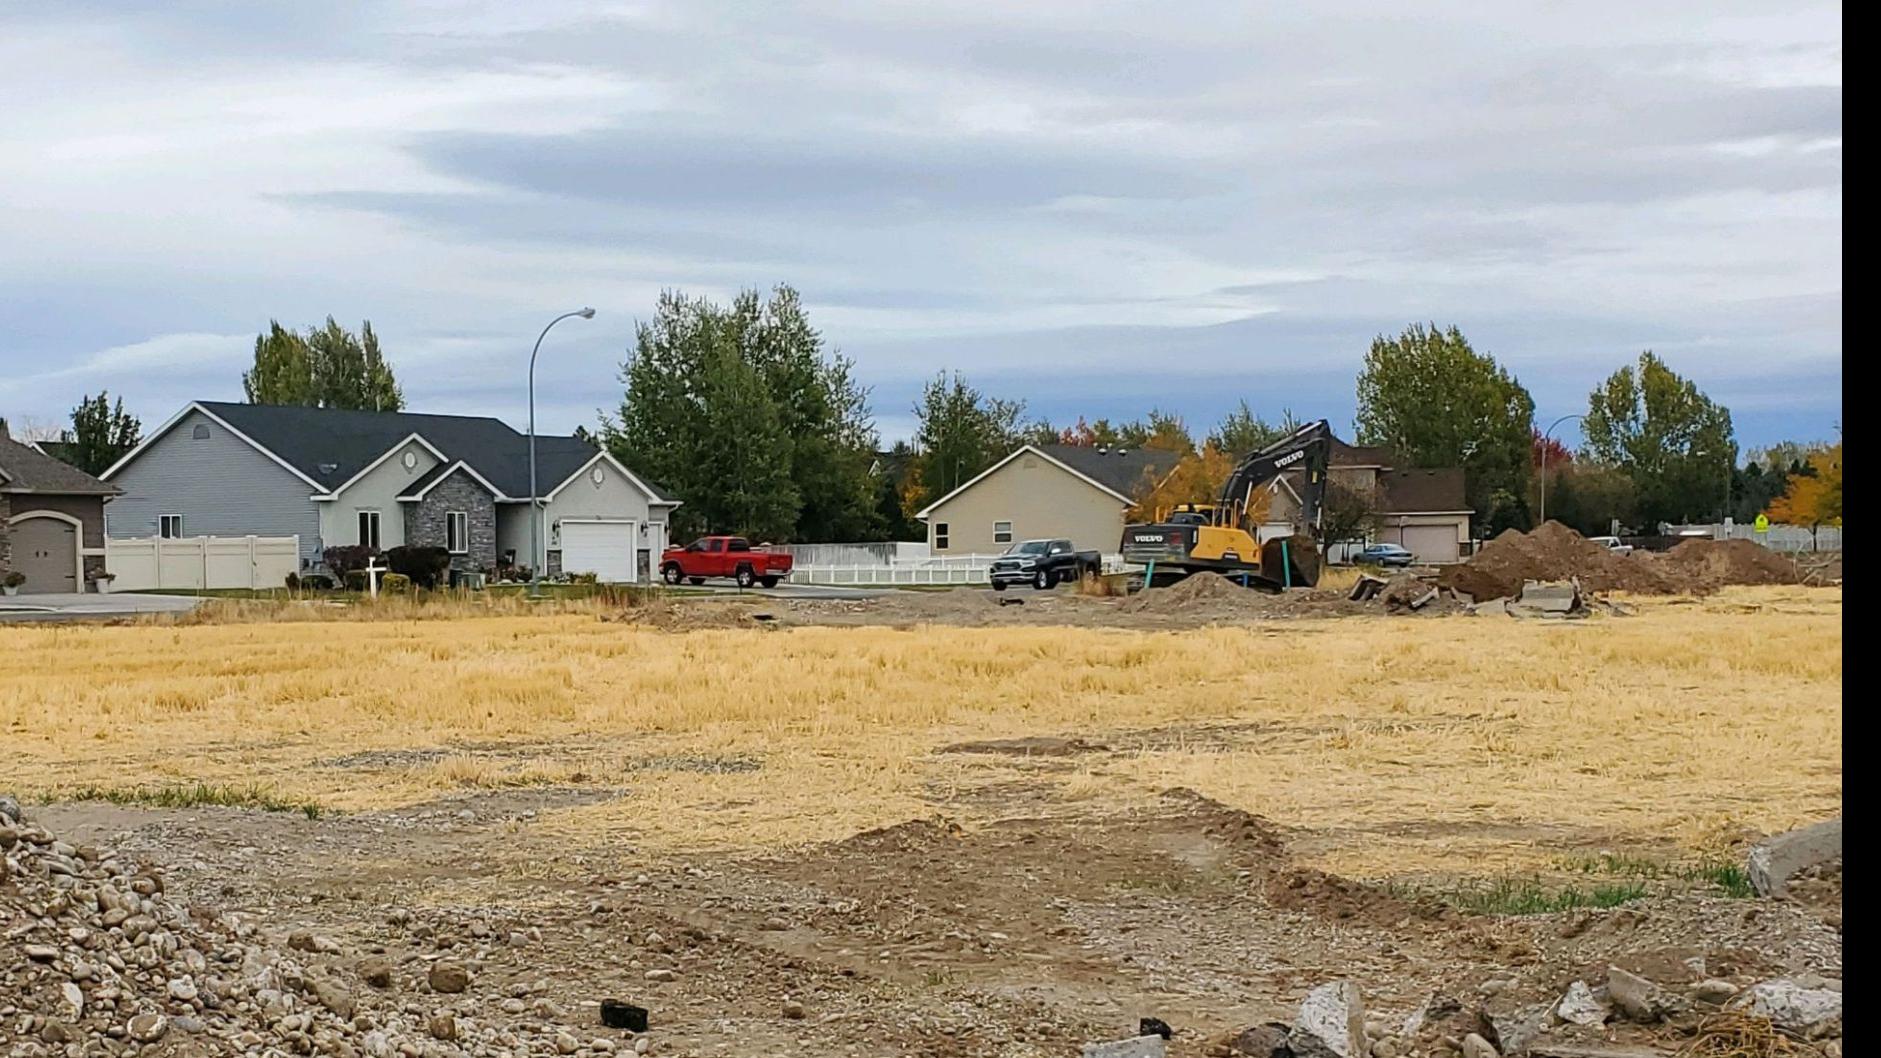 New 'game ranch' development causing concerns among some in Madison County  - East Idaho News